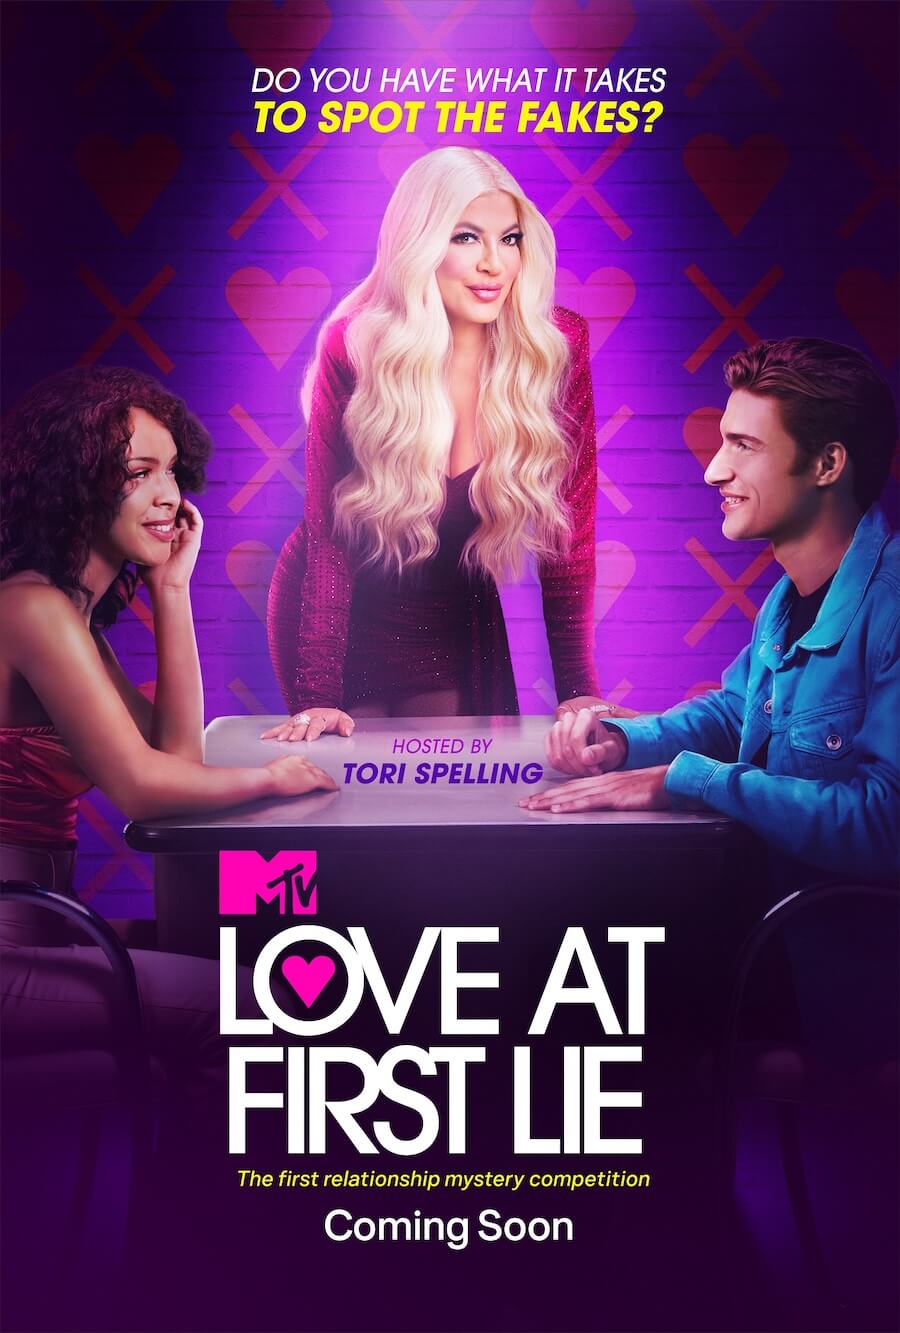 Tori Spelling conduce Love at First Lie, primo game show sull'amore e le bugie di coppia (anche LGBTQ+) - Love at First Lie - Gay.it